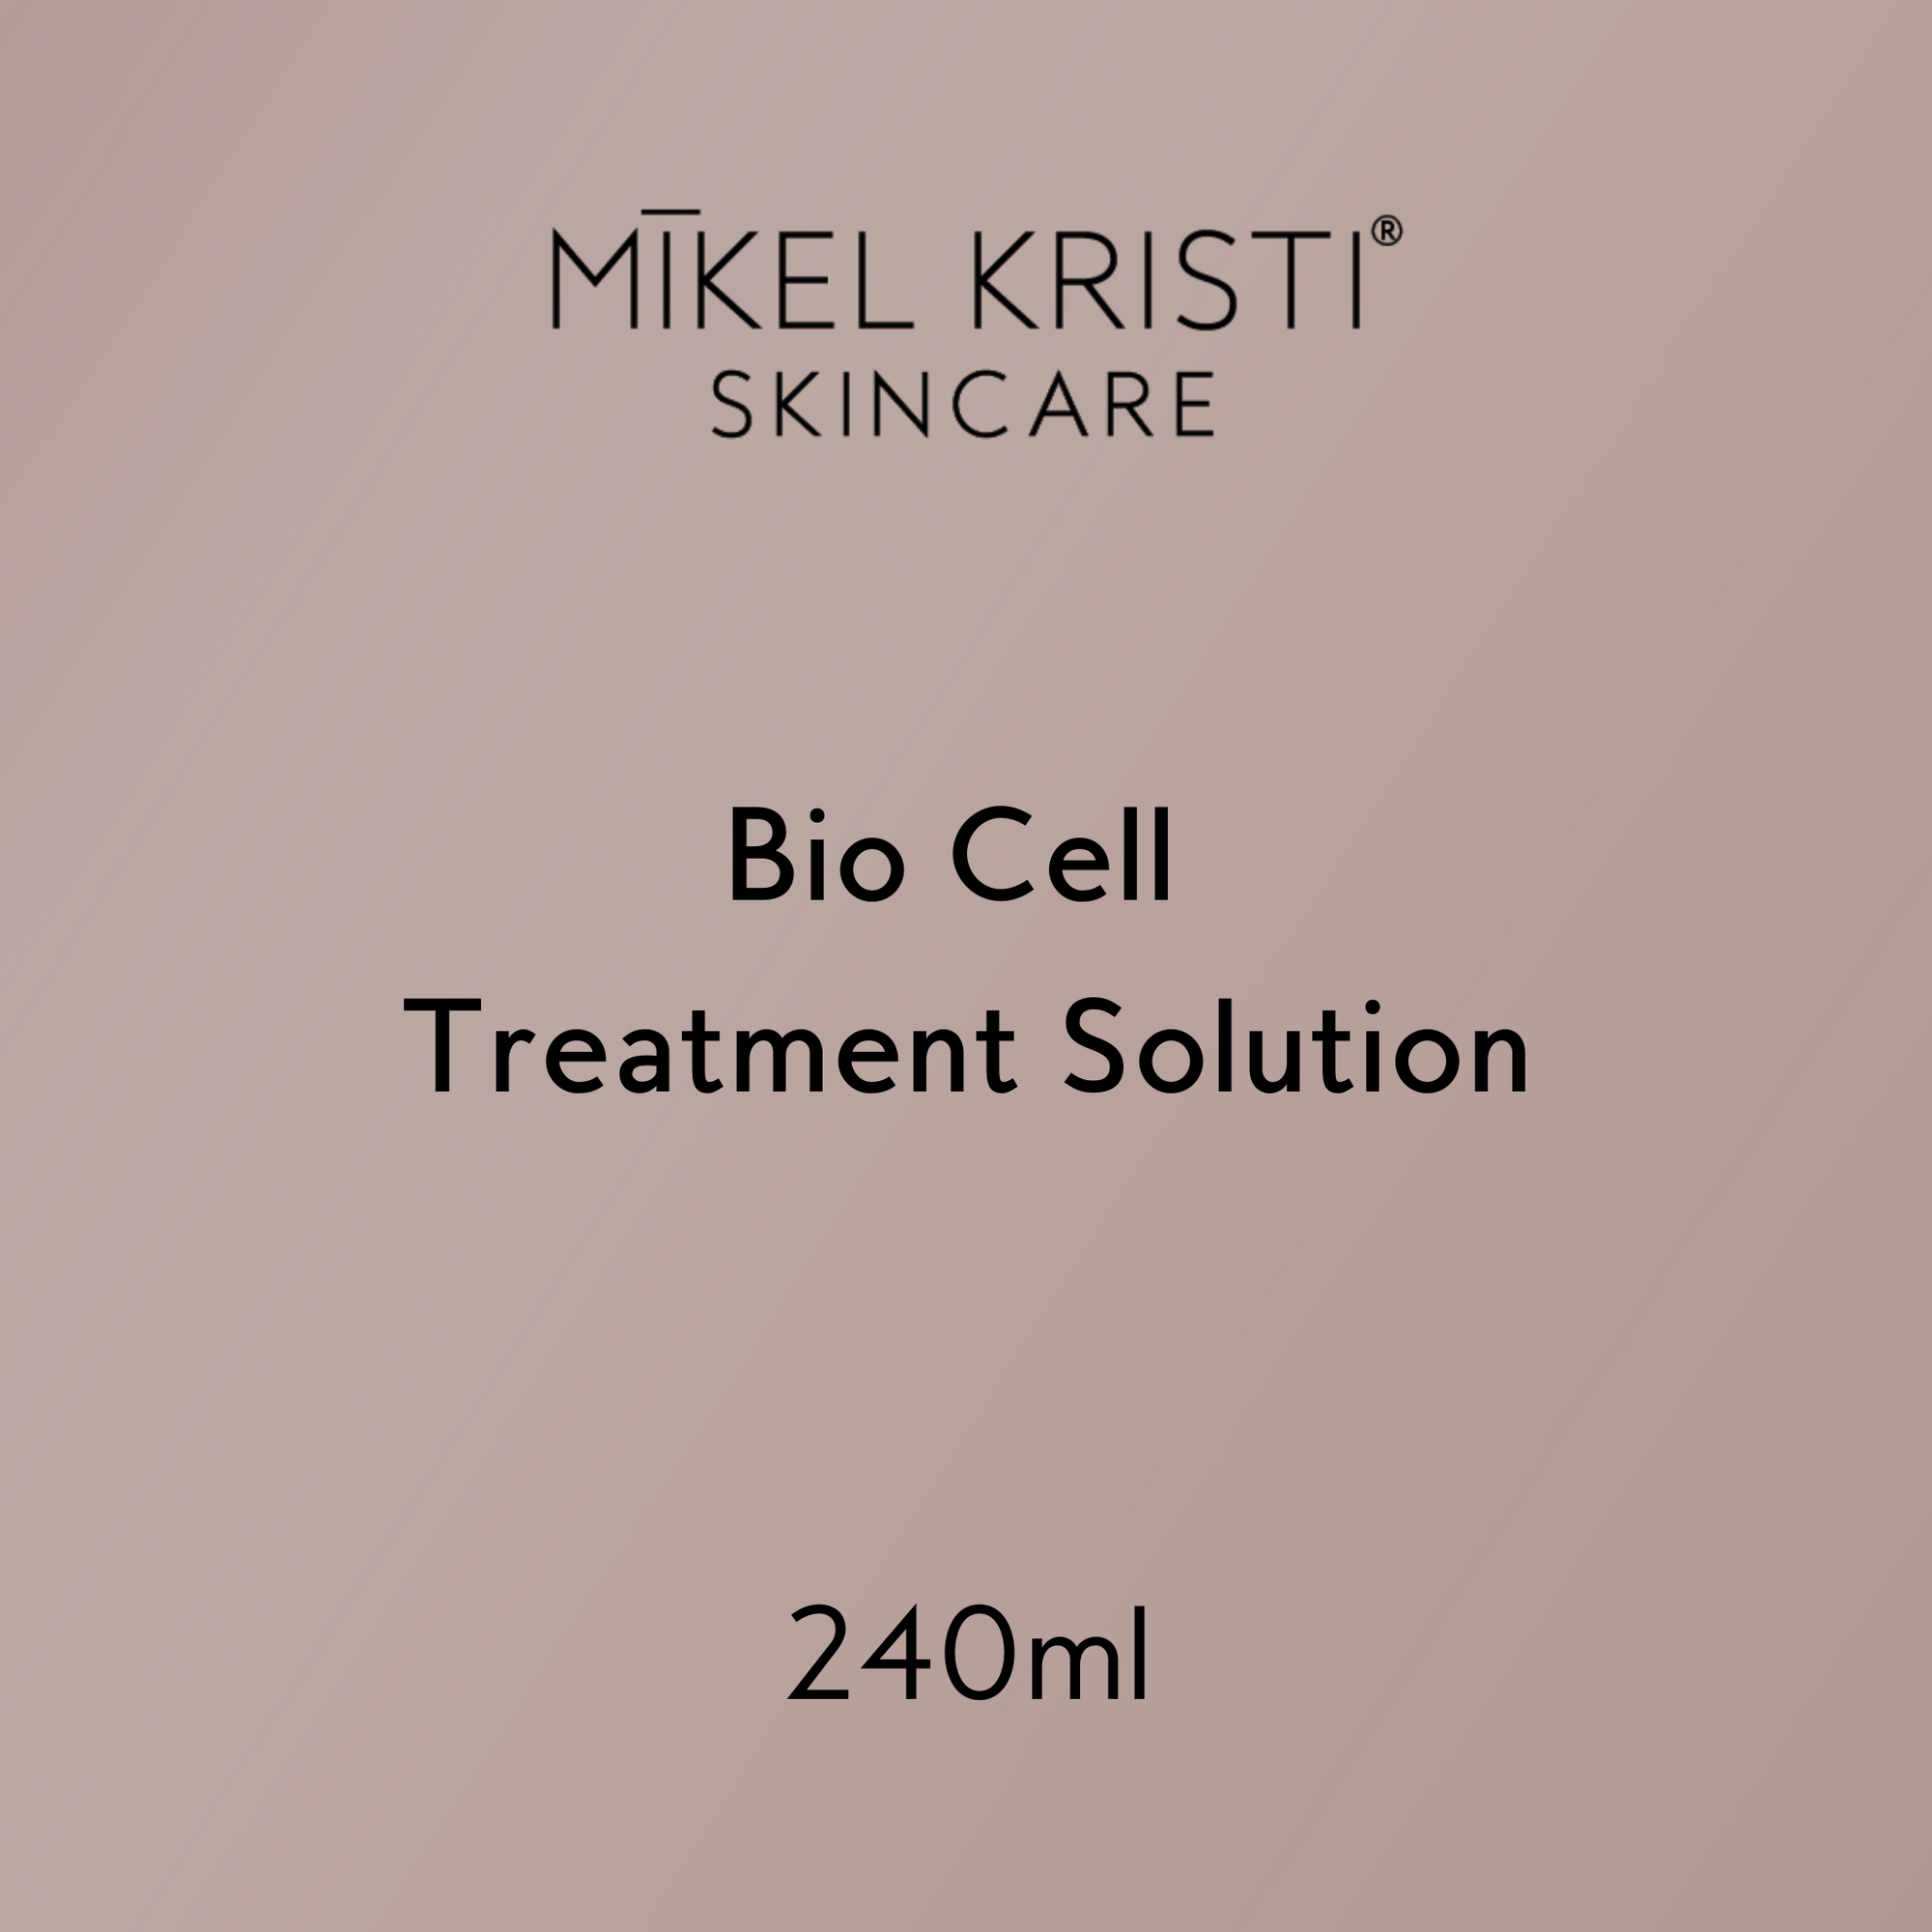 Bio Cell Treatment Solution is for professional use only. Please contact wholesaleinfo@mikelkristi.com for pricing, approval, or to learn more.